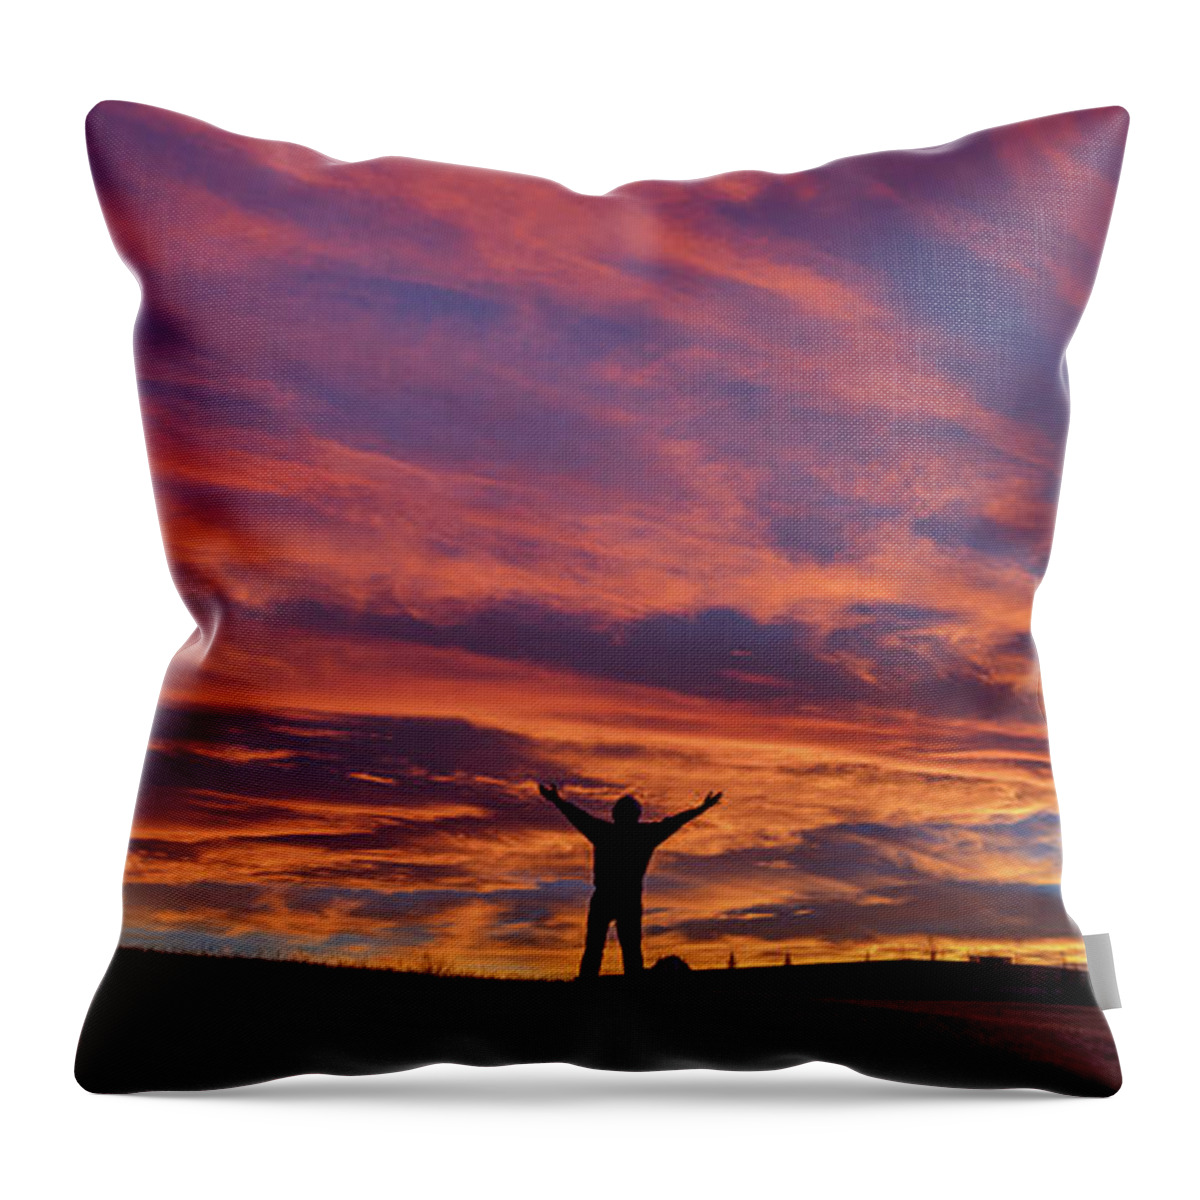 Alone Throw Pillow featuring the photograph Humbled by Manpreet Sokhi